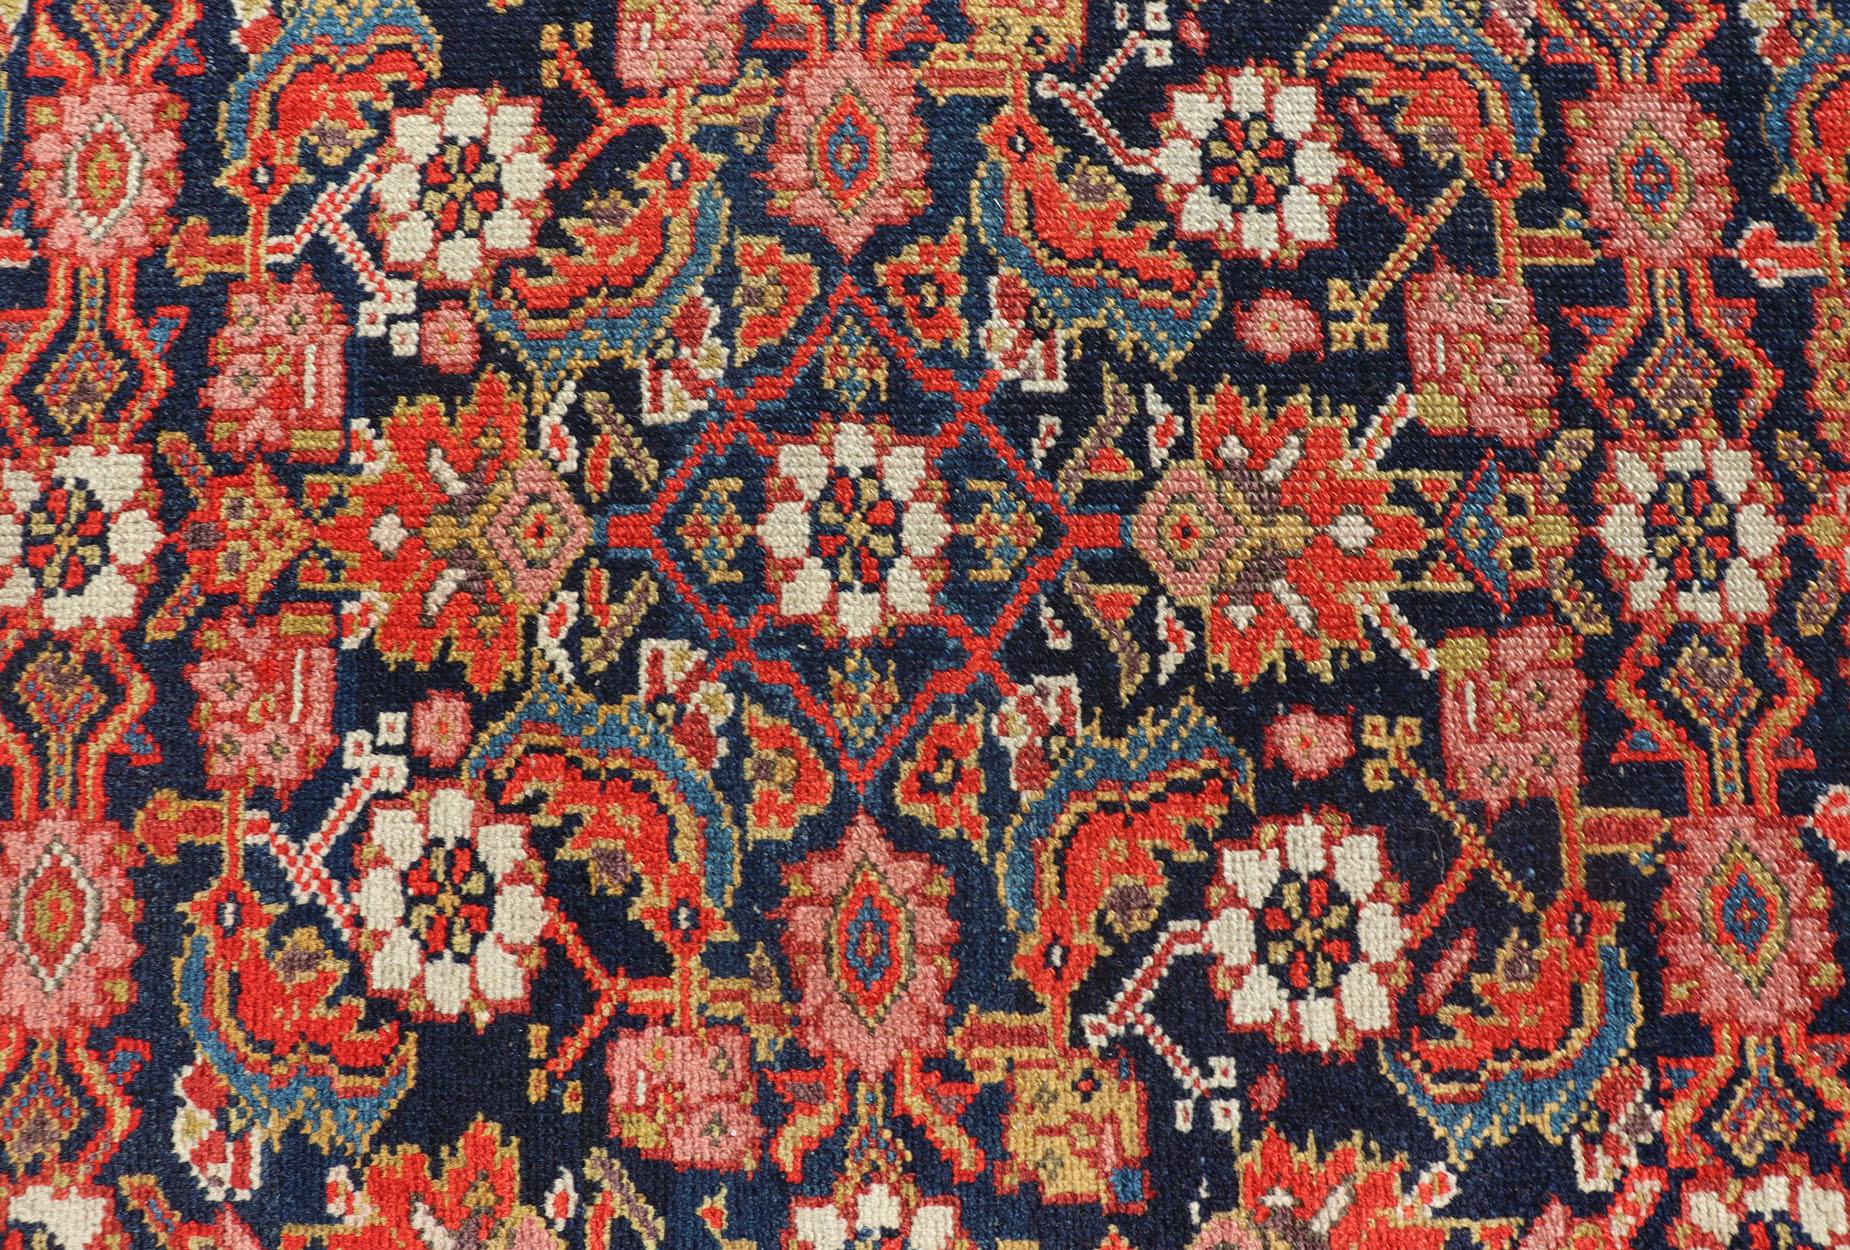 Antique Malayer runner, rug PTA-21015, country of origin / type: Persian / Malayer, circa Early-20th century.

This antique Malayer features an all-over Herati Design set upon a dark blue background. The herati patterns are rendered in variations